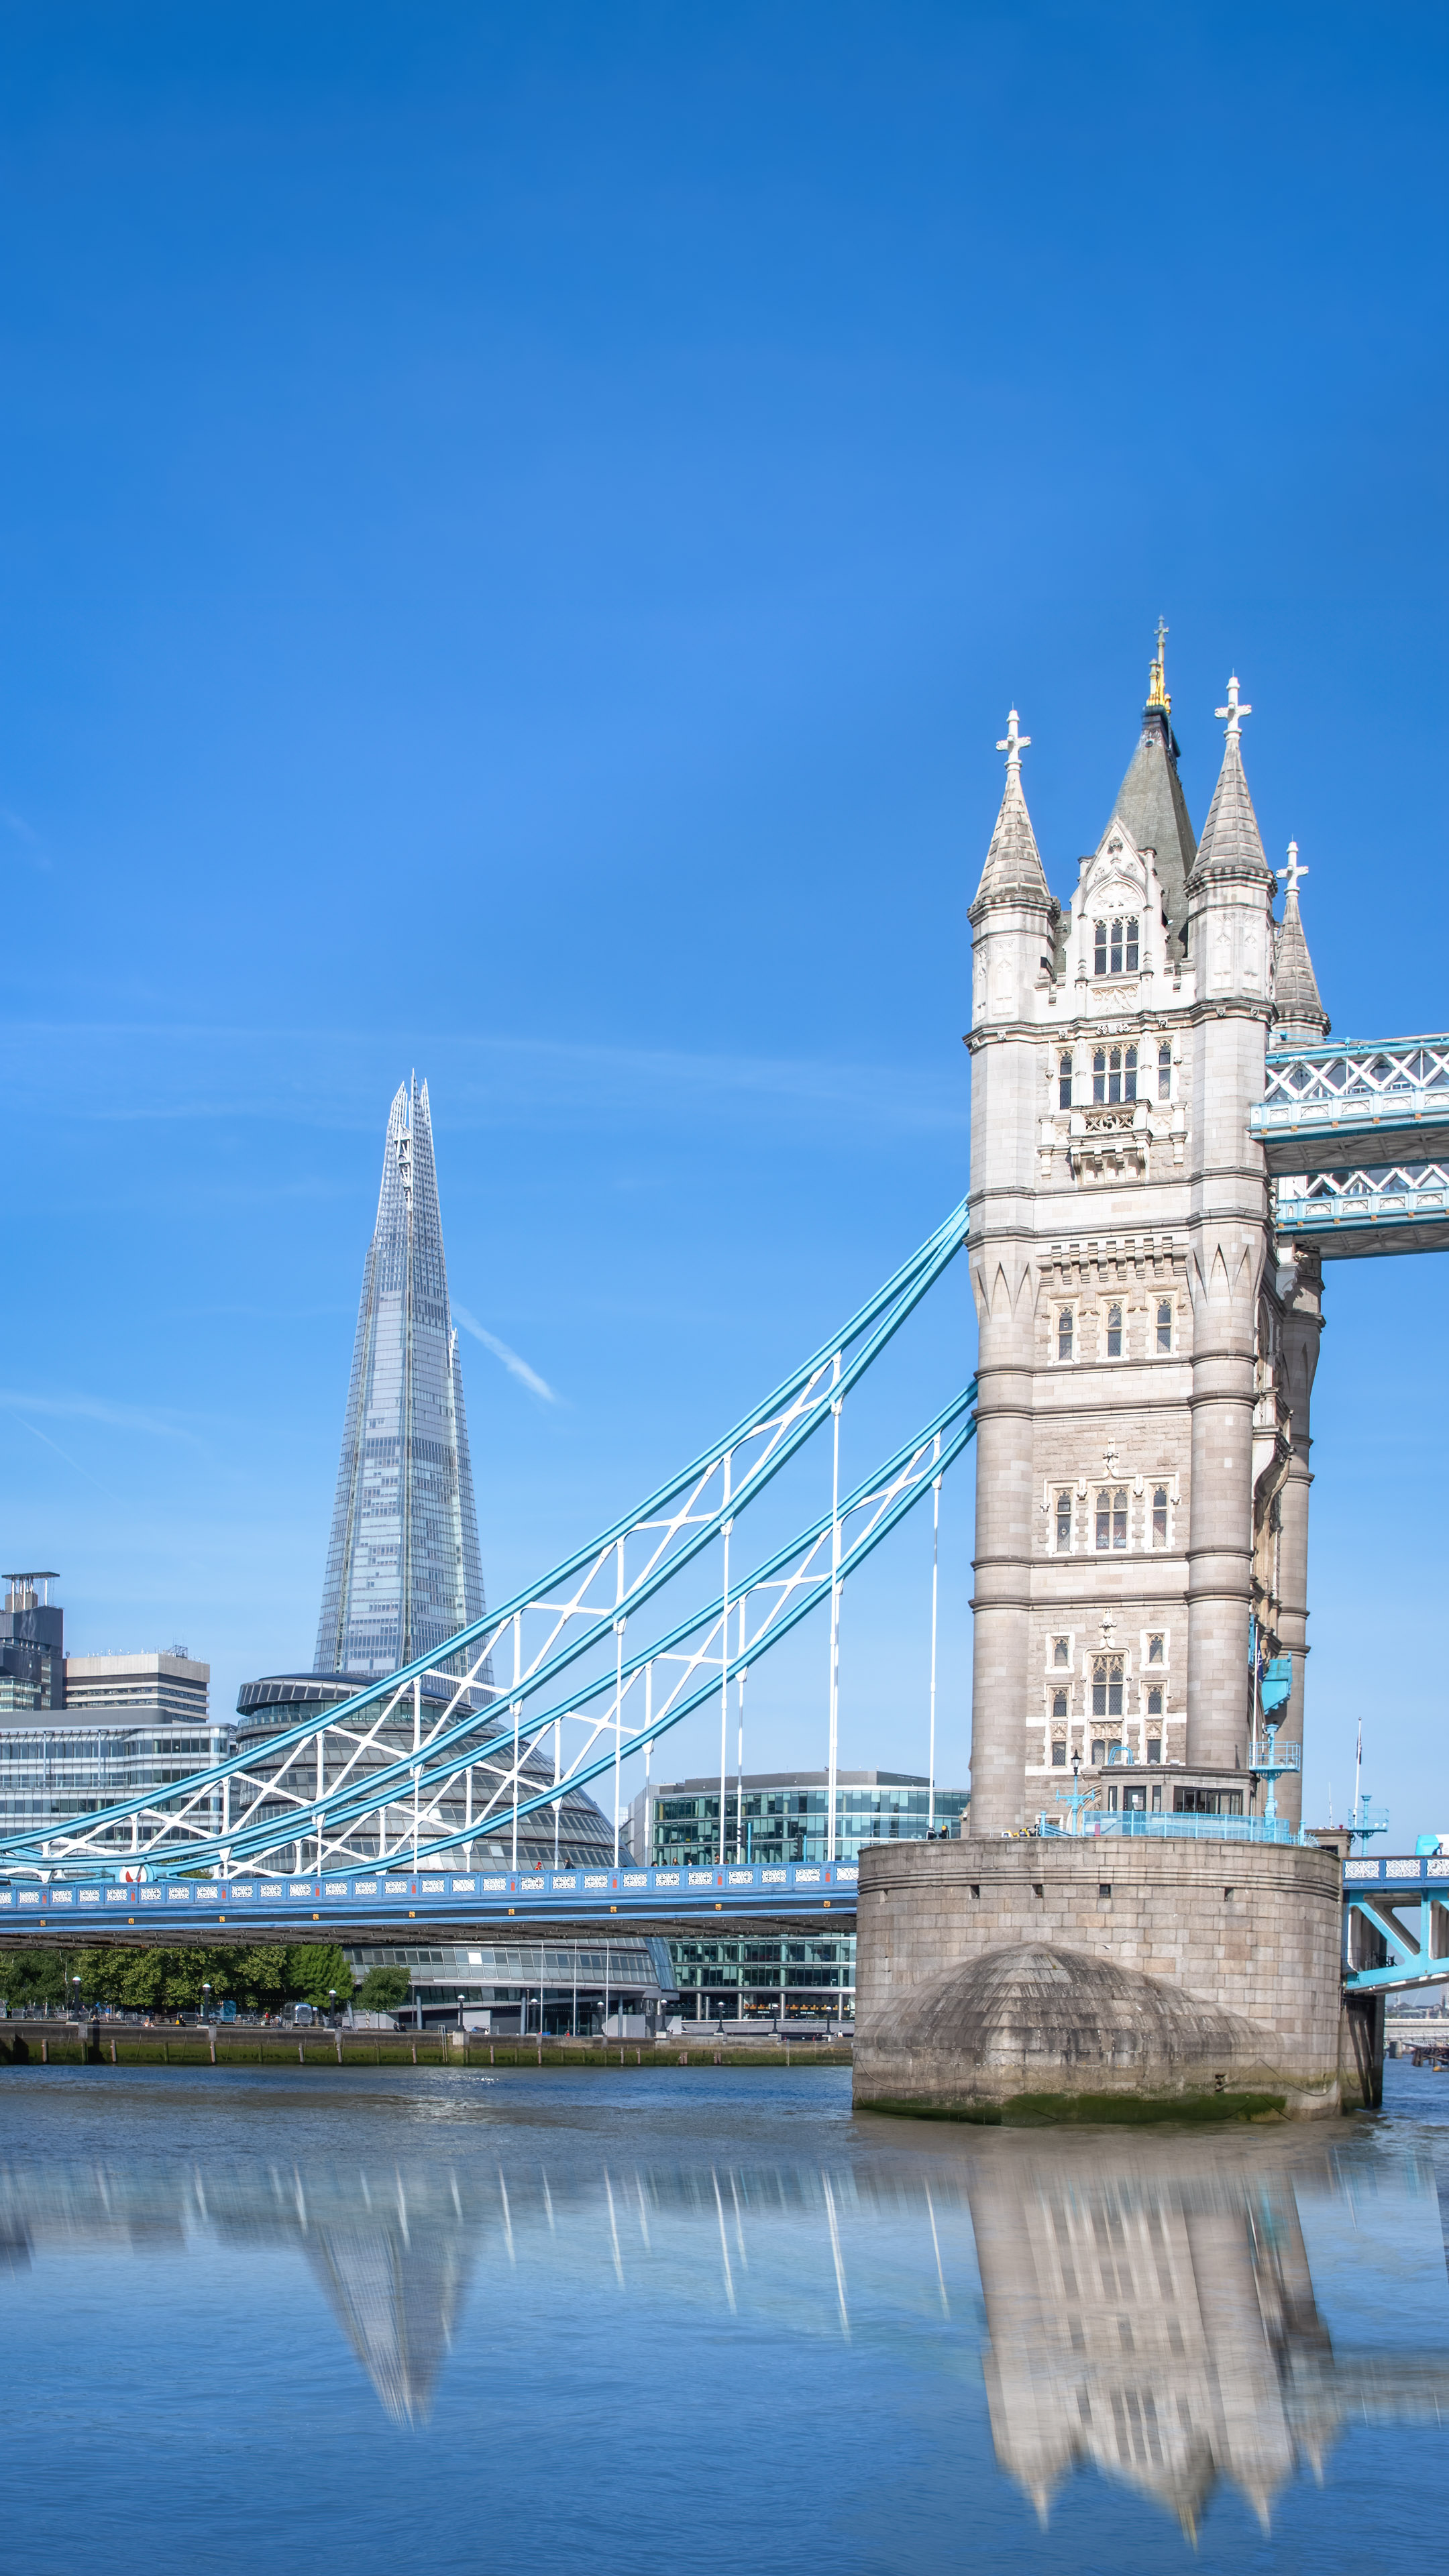 Add a touch of sophistication to your iPhone with this London cityscape wallpaper featuring Tower Bridge